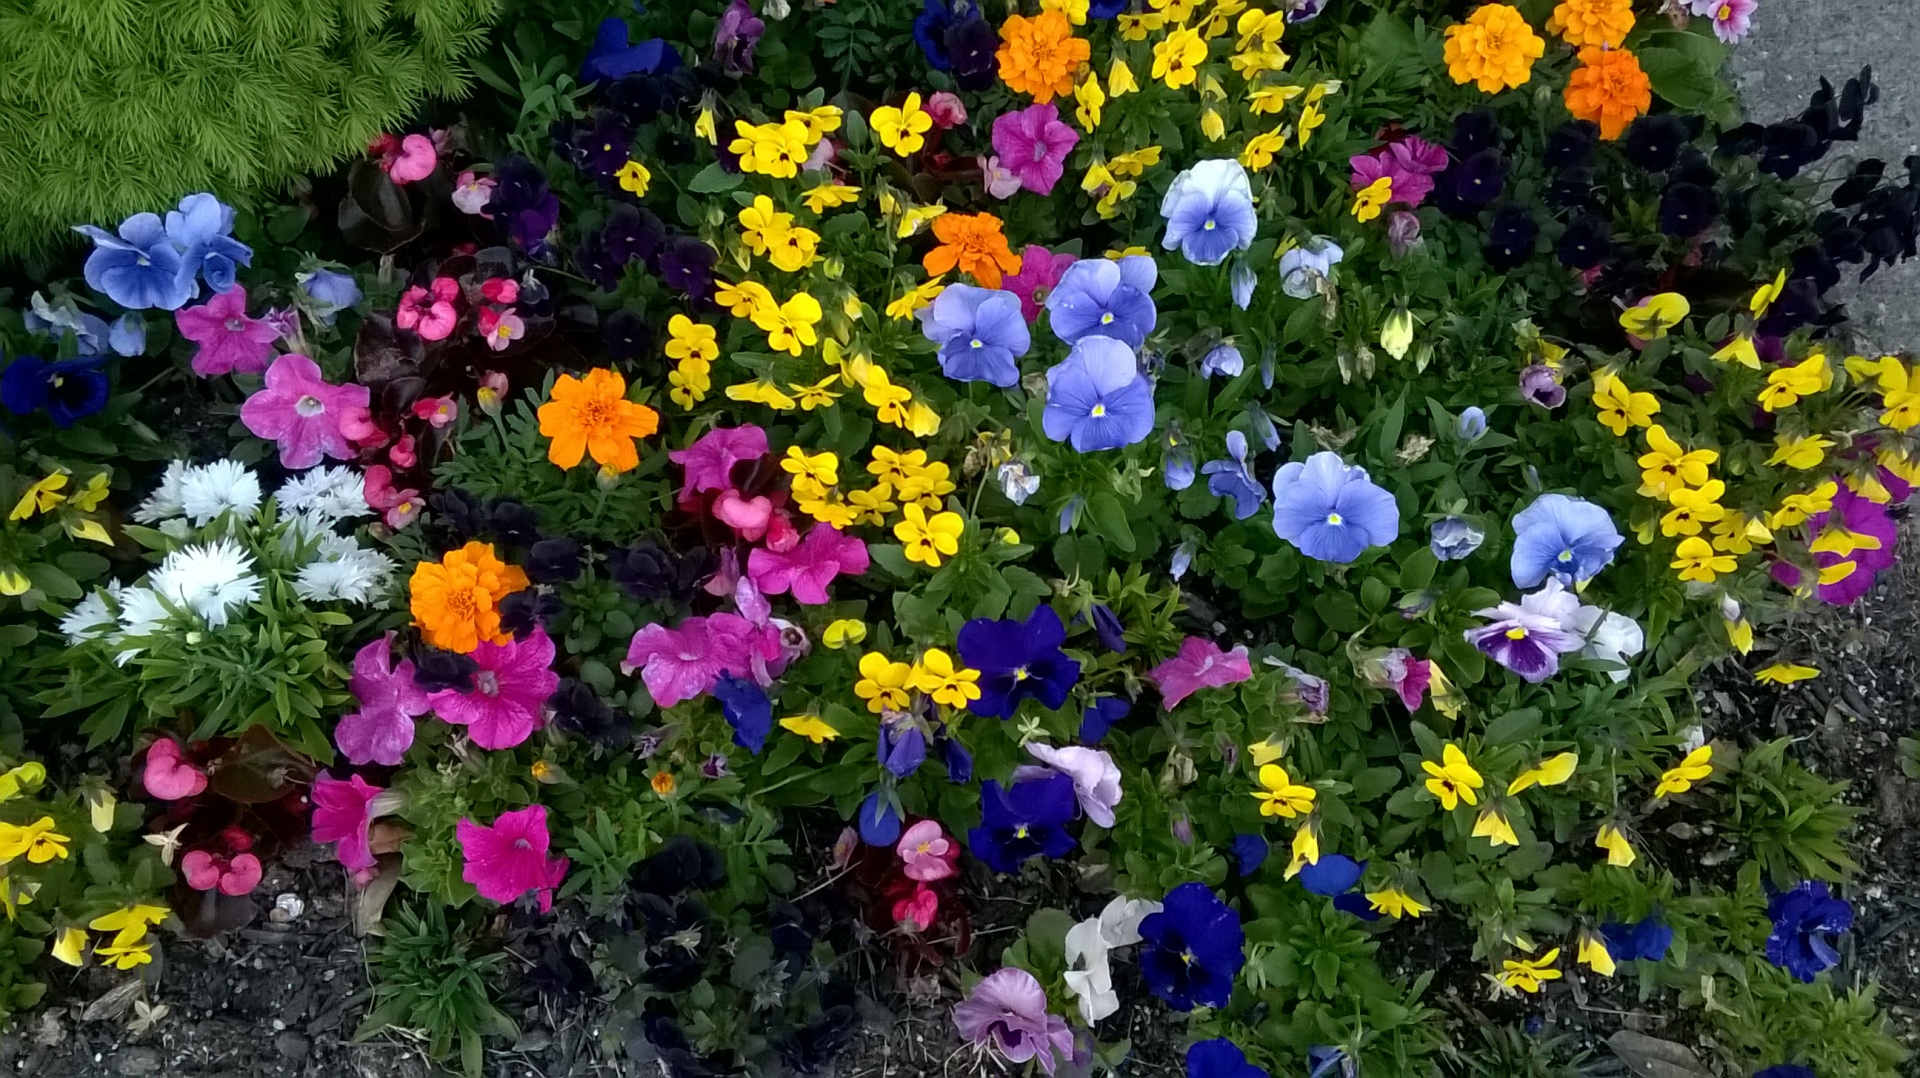 Colourful flower bed with variety of flowers